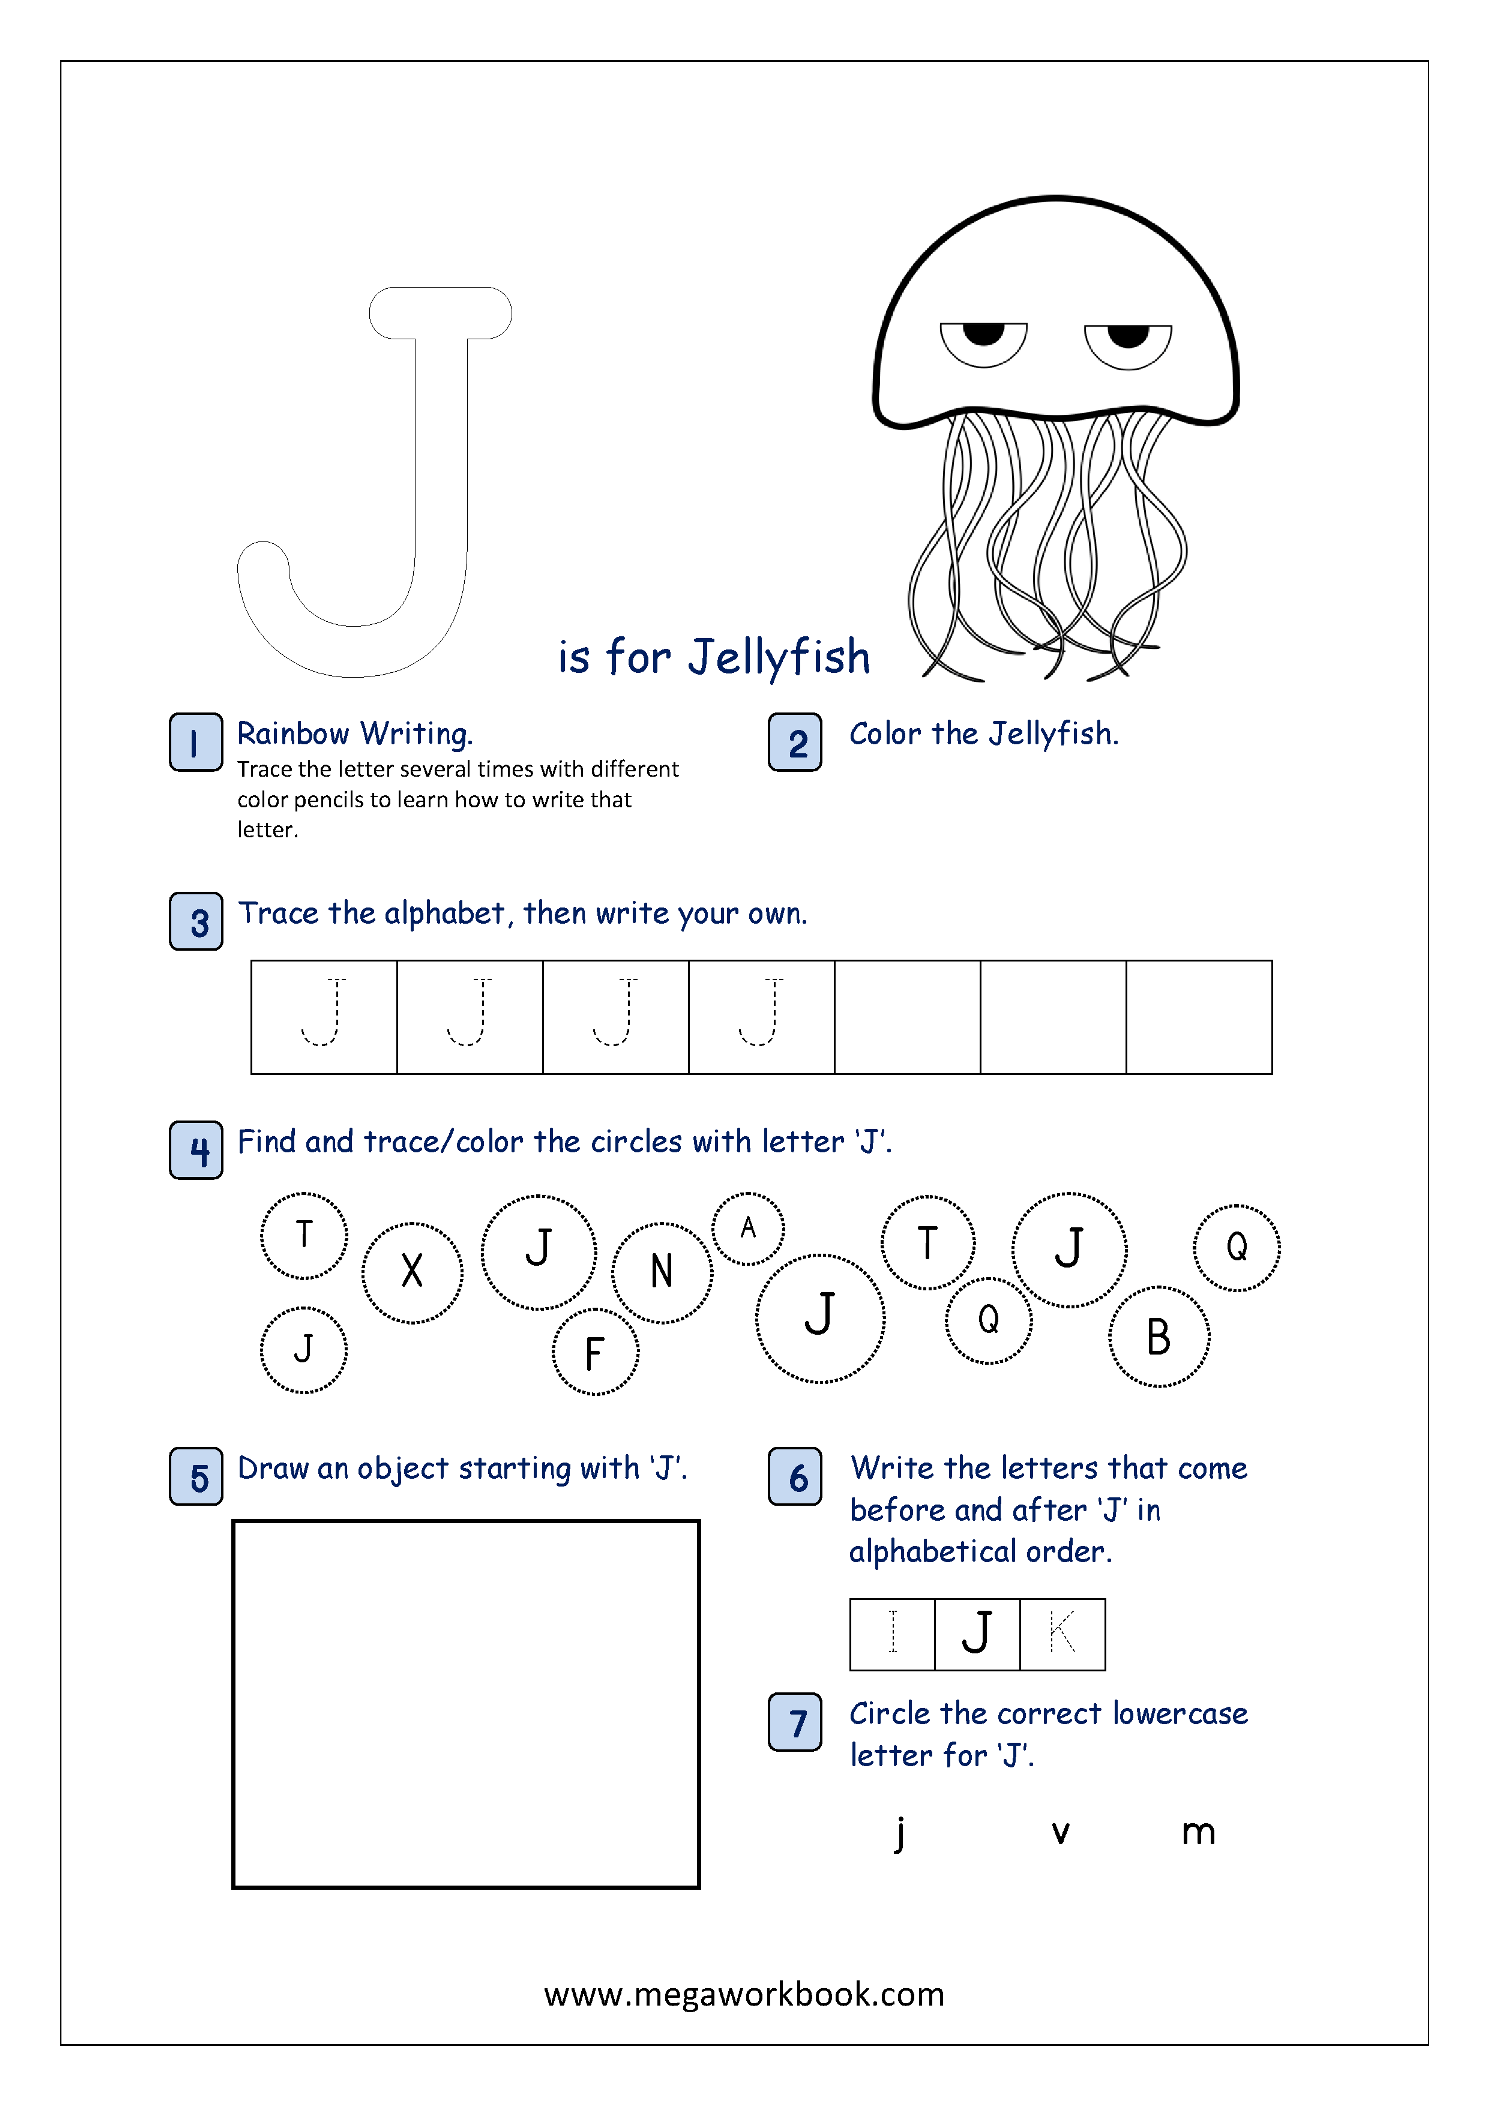 J Worksheet | Printable Worksheets And Activities For with regard to Letter J Worksheets Twisty Noodle